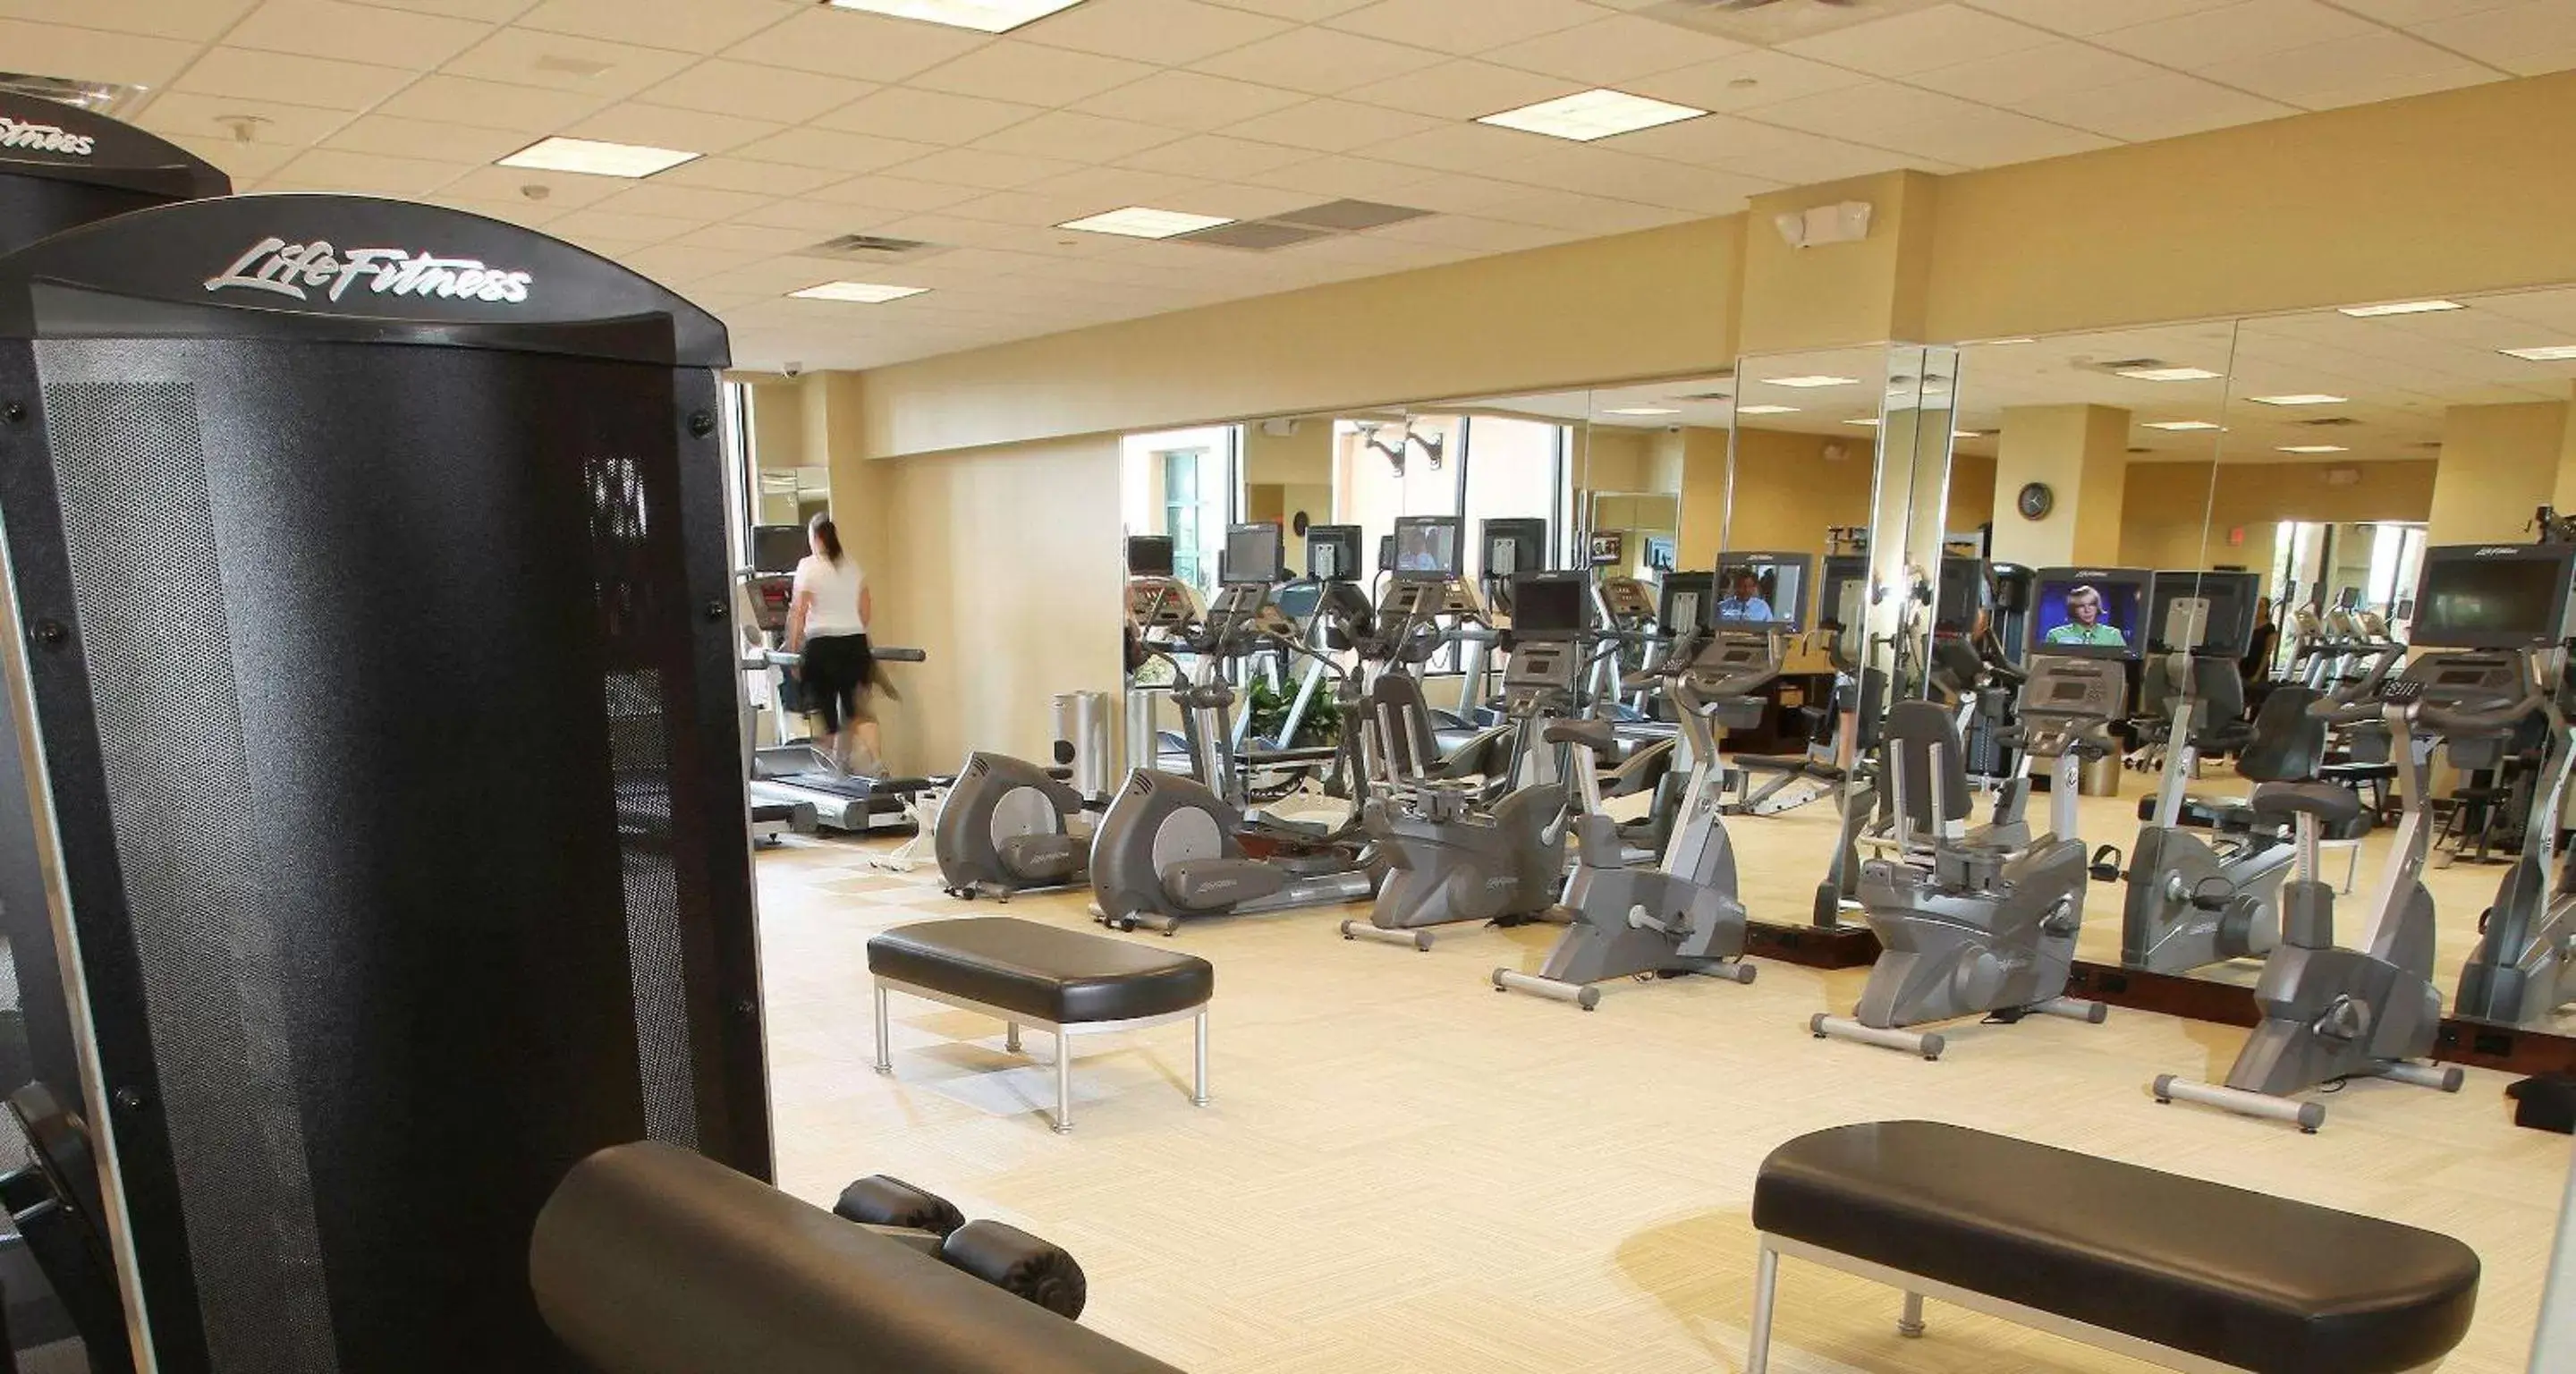 Fitness centre/facilities, Fitness Center/Facilities in The Florida Hotel & Conference Center in the Florida Mall